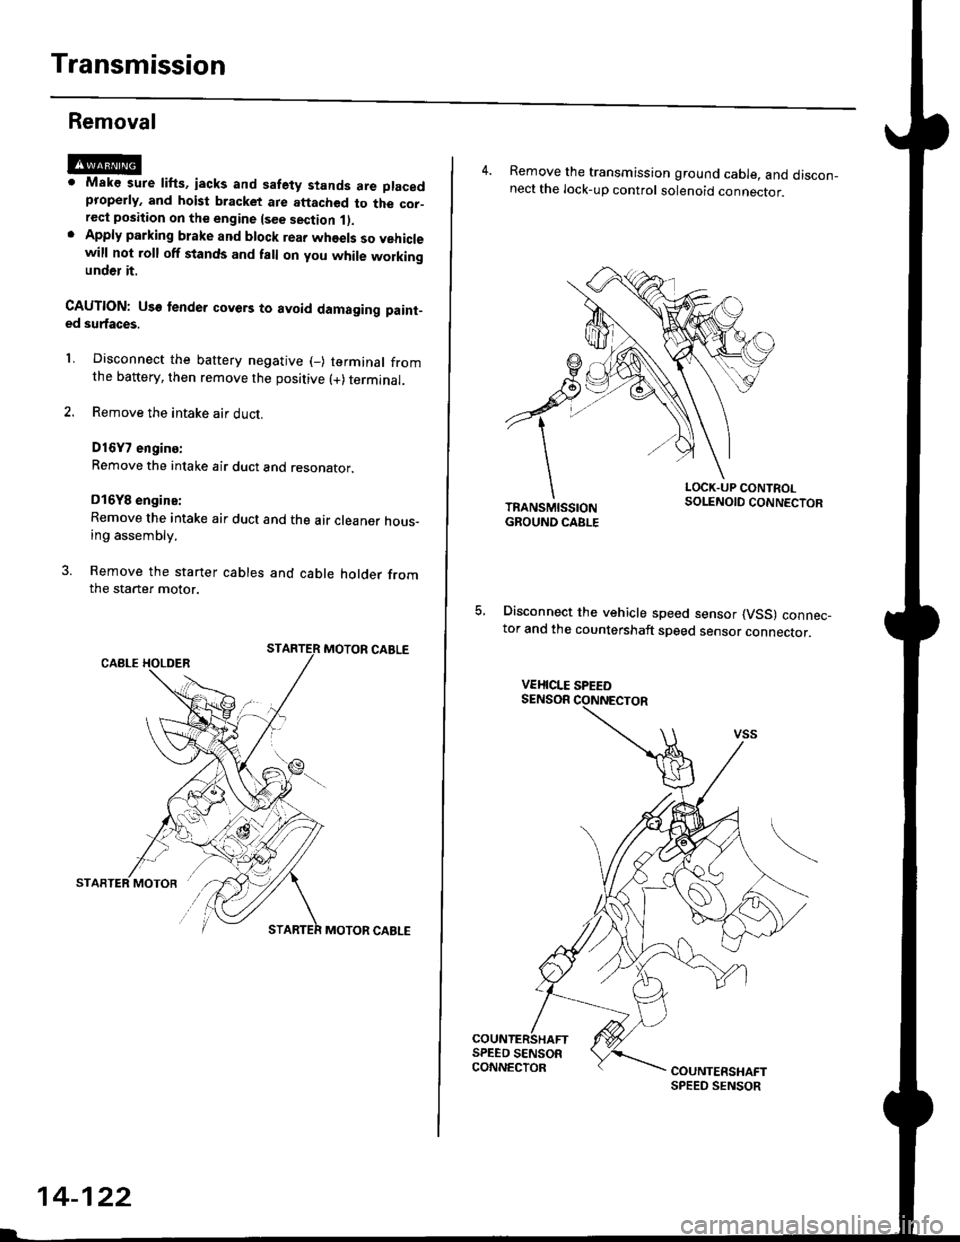 HONDA CIVIC 1997 6.G User Guide Transmission
Removal
@Maks sure lifts, iacks and safety stands are placedproperly, and hoist bracket ate aftached to the cor_rec{ position on the engine lsee section 1).Apply parking brake and block r